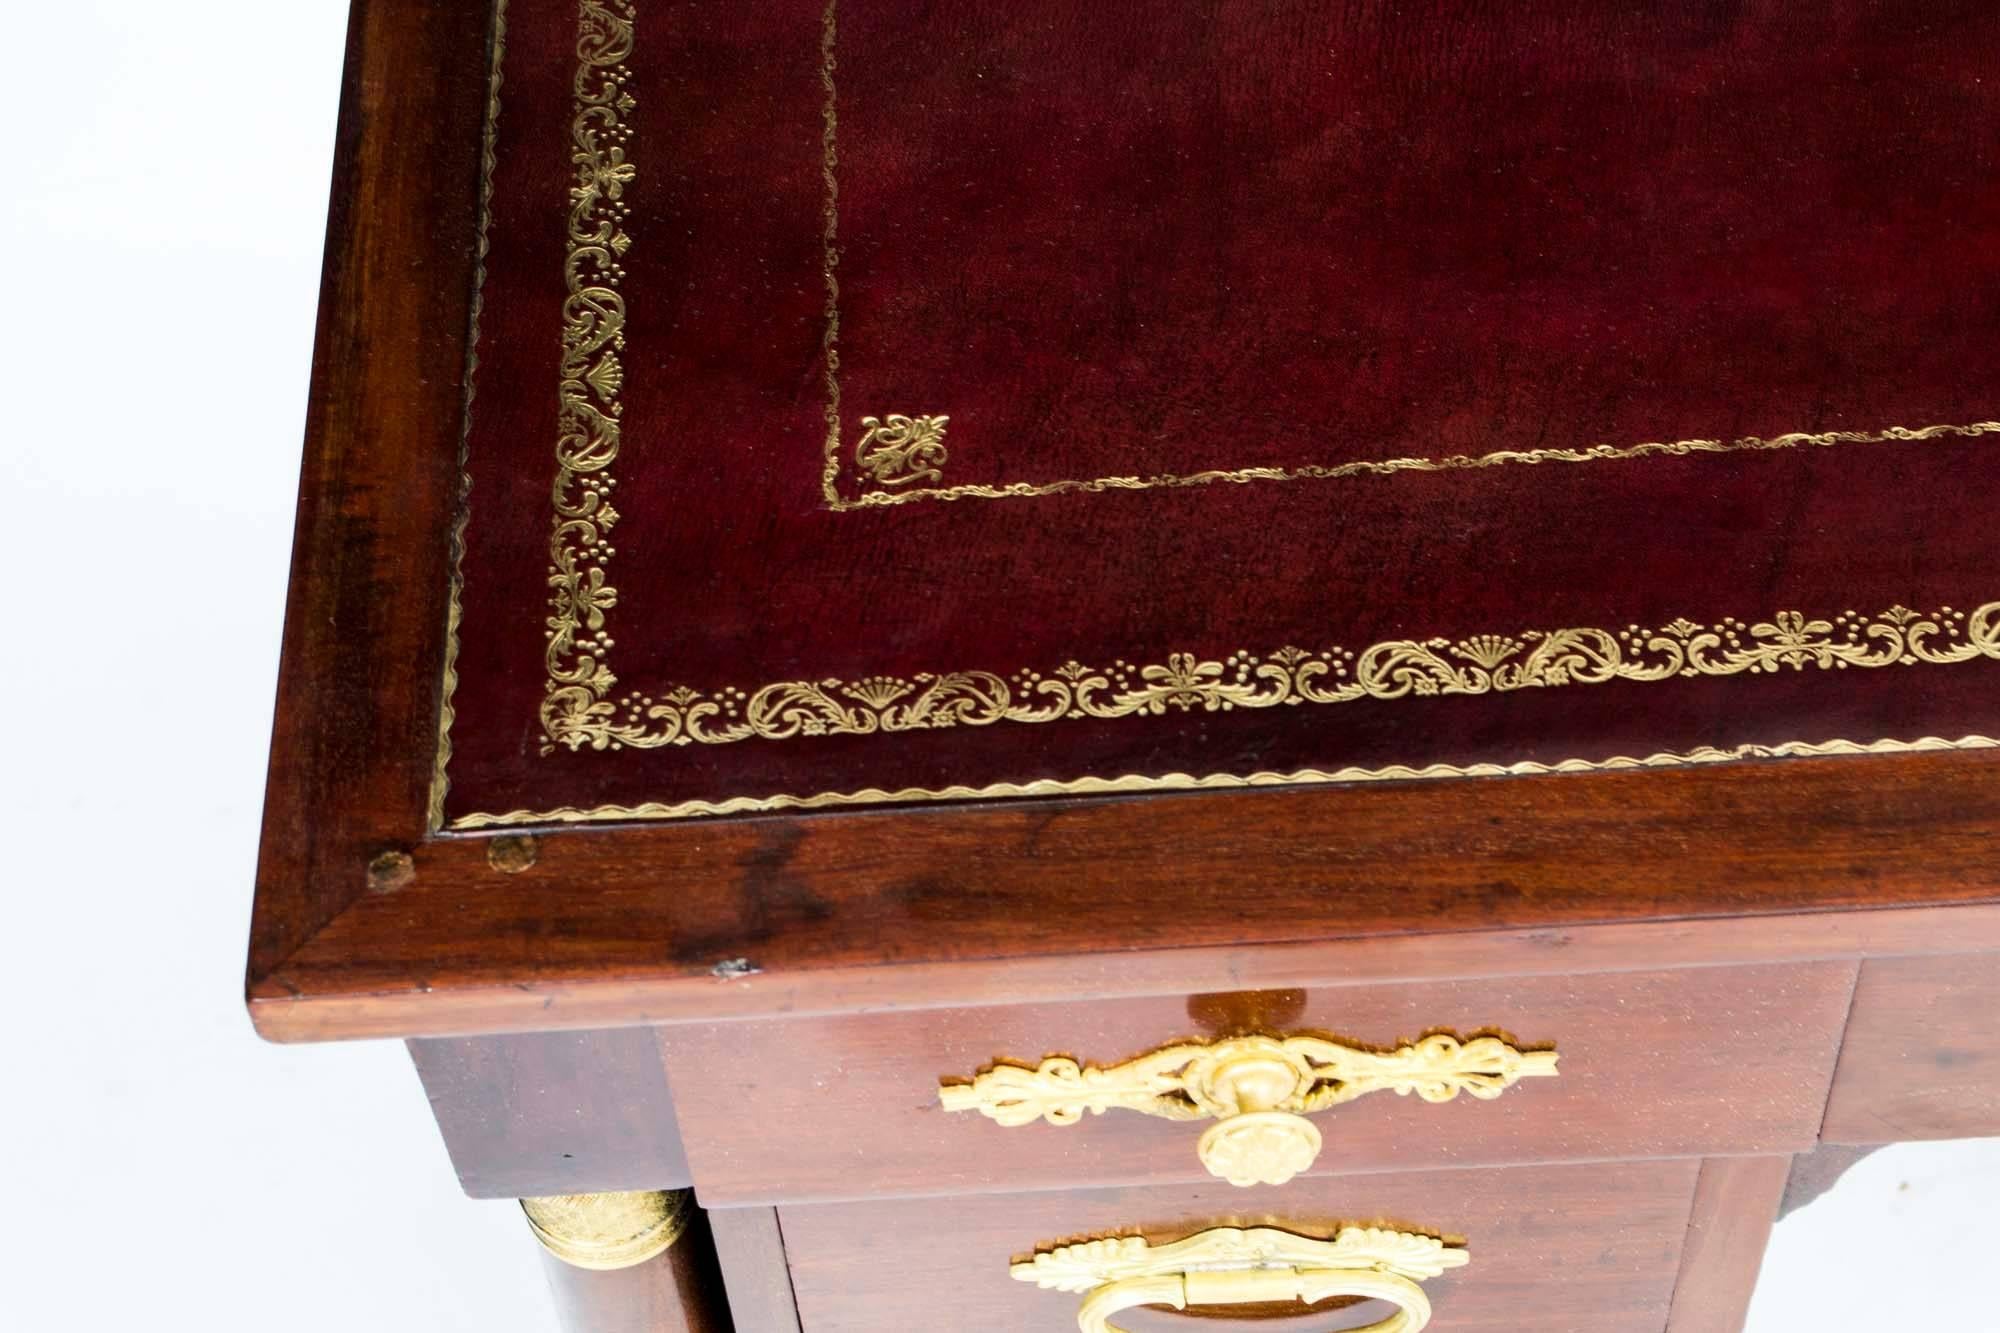 We are pleased to offer for sale this very elegant Antique Empire Ormolu Desk which has been made in the Louise Philippe Style and which dates from around 1880.

This antique French desk is made in the classical Empire style from solid mahogany and